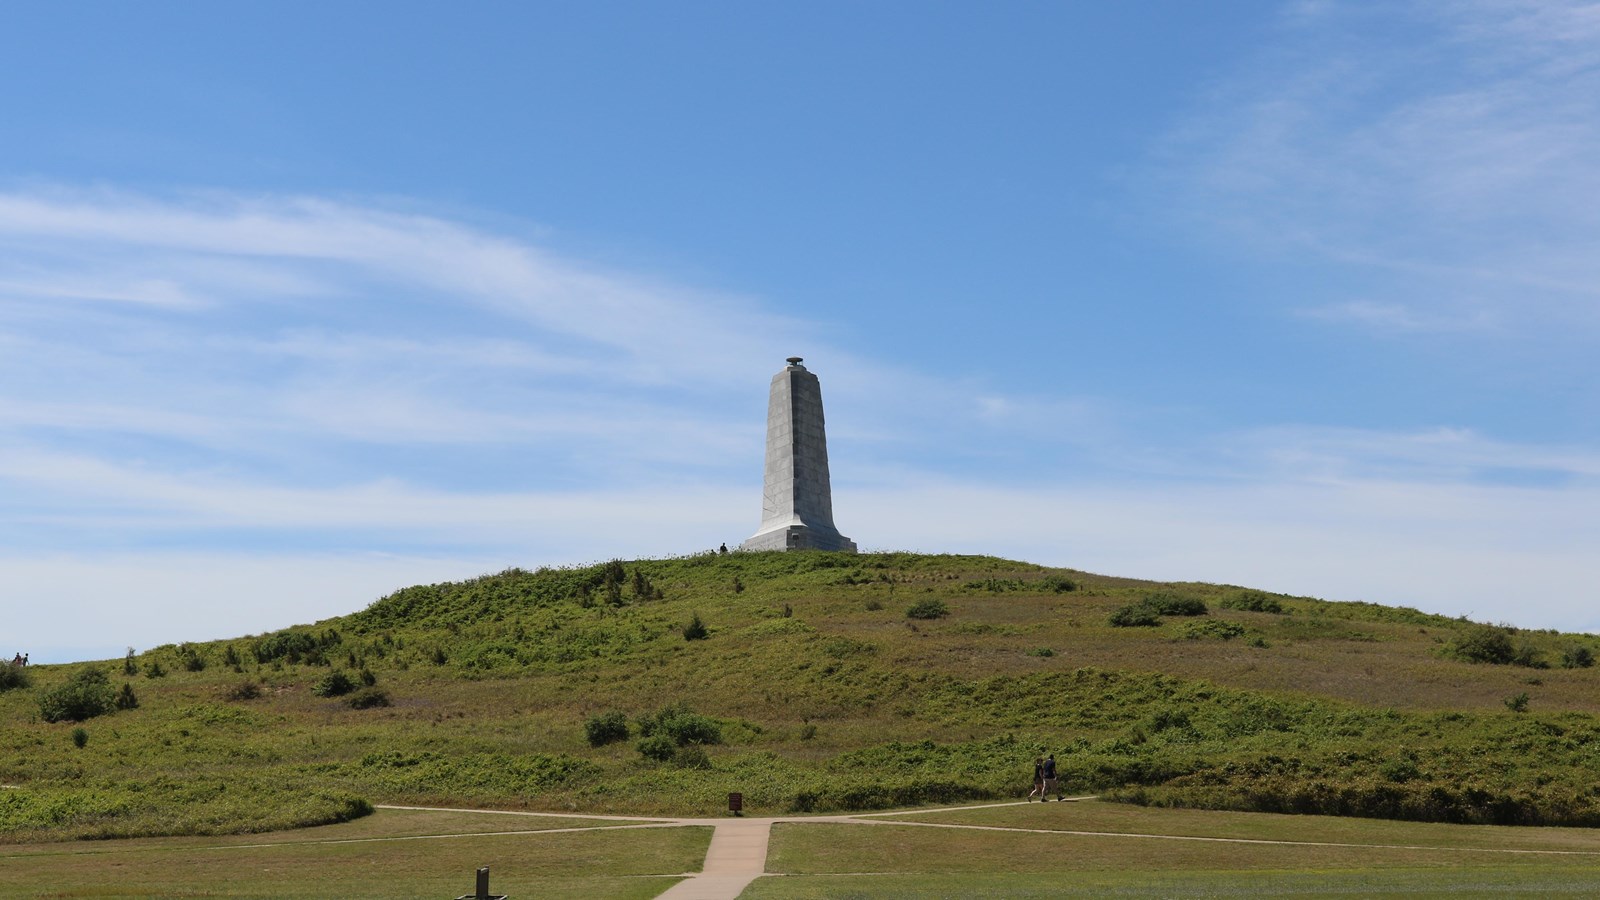 The Wright Brothers Monument sits on top of a tall hill, covered in grass and vegetation.